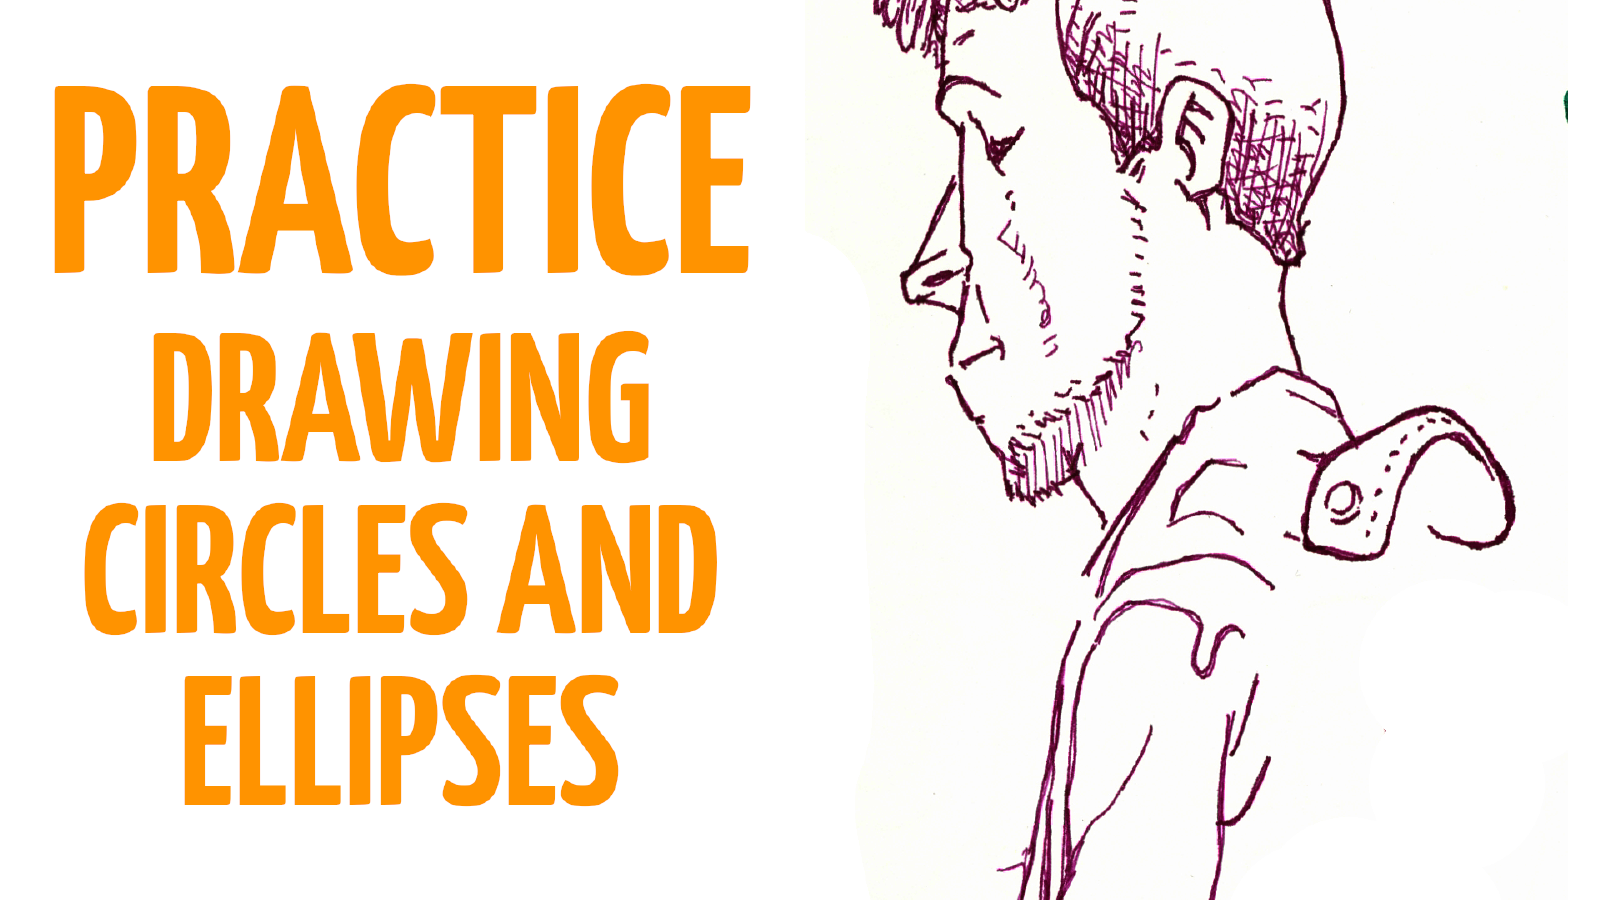 Practice Drawing Circles And Ellipses